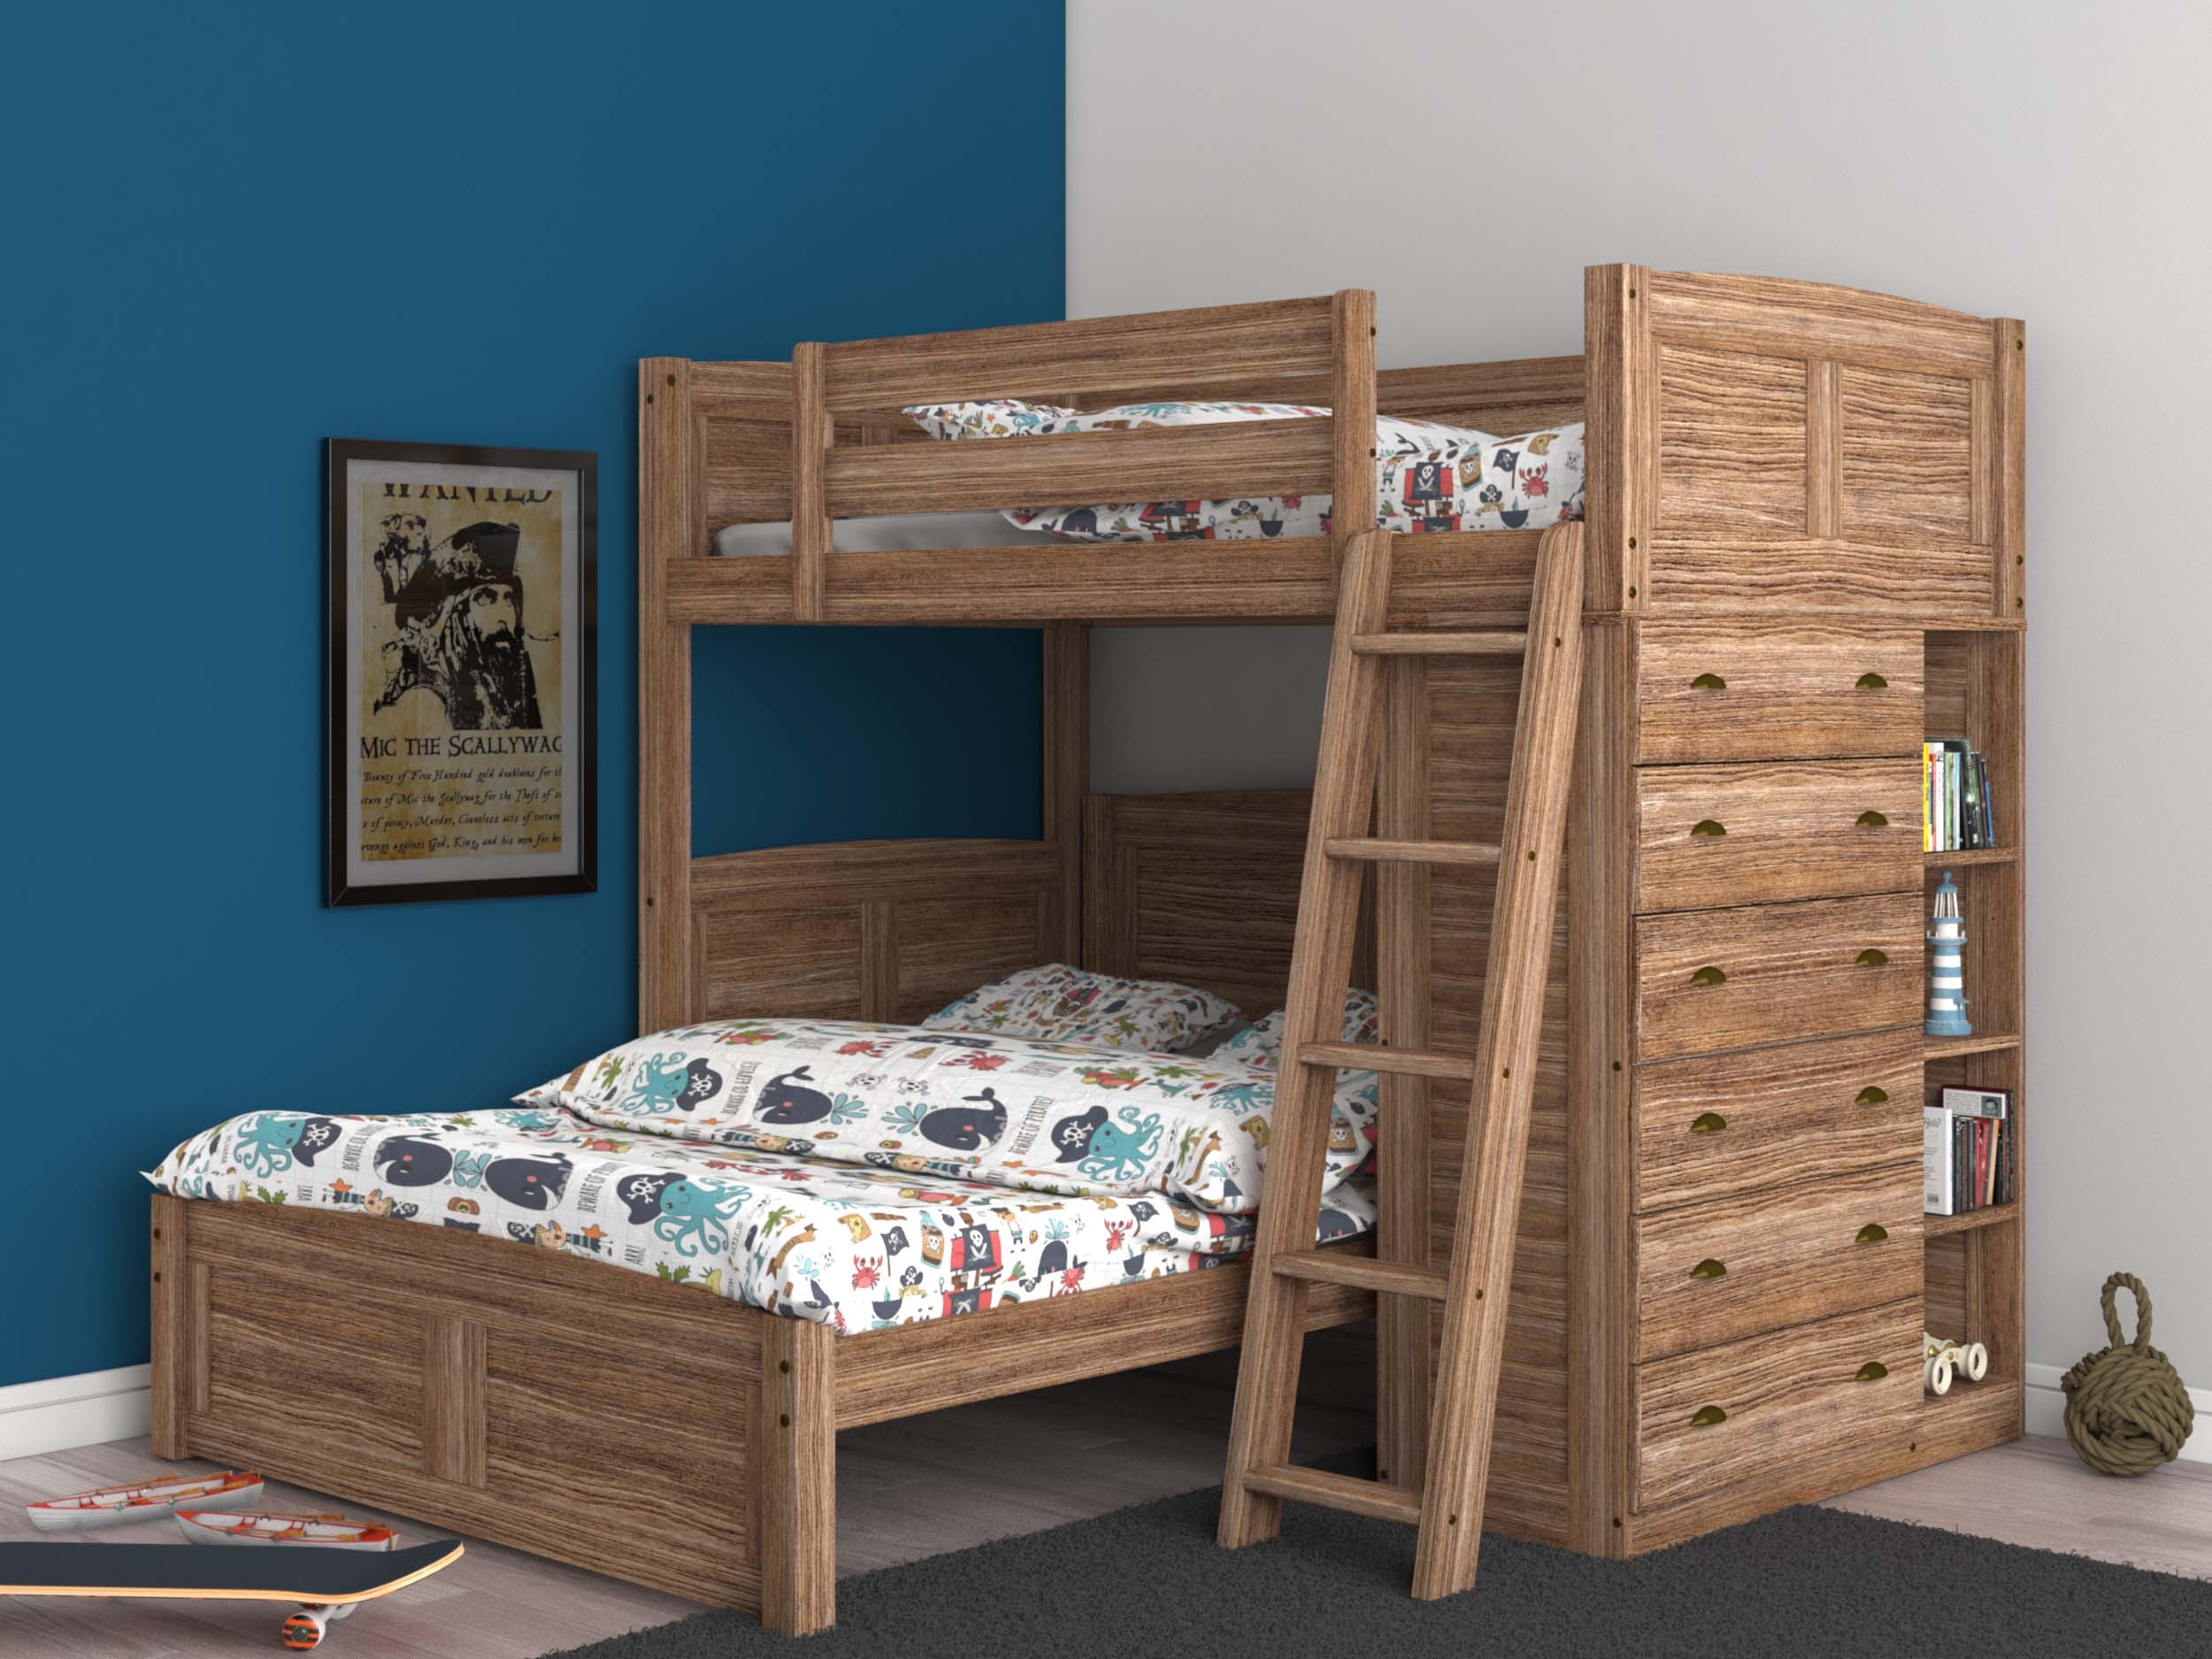 Bunk Beds With Dressers Visualhunt, Rooms To Go Bunk Beds With Desk